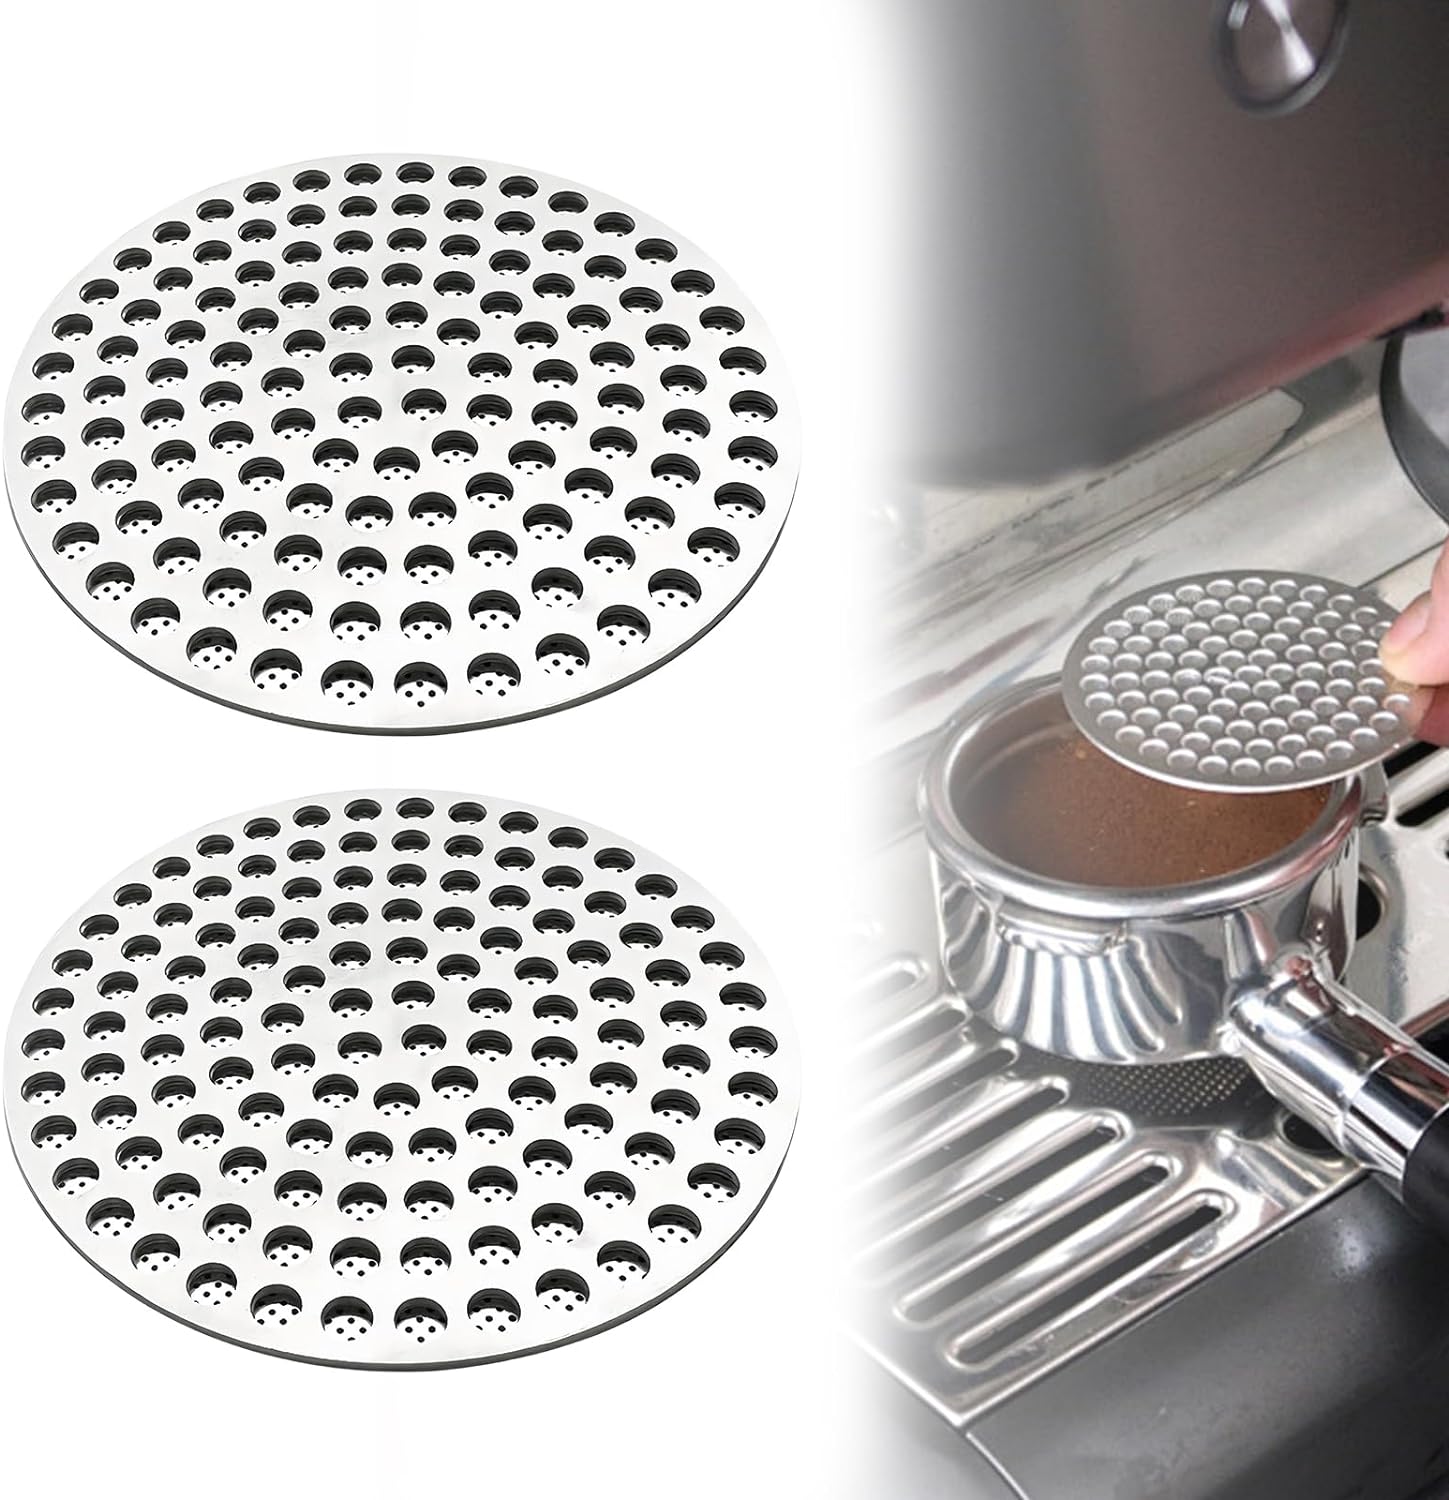 Pack of 2 Puck Screen 51/53/58 mm, Strainer for Portafilter, 1.2 mm Thickness 150 μm, 304 Stainless Steel, Reusable Portatilter, Filter Holder Accessories for Coffee Machine (51 mm)